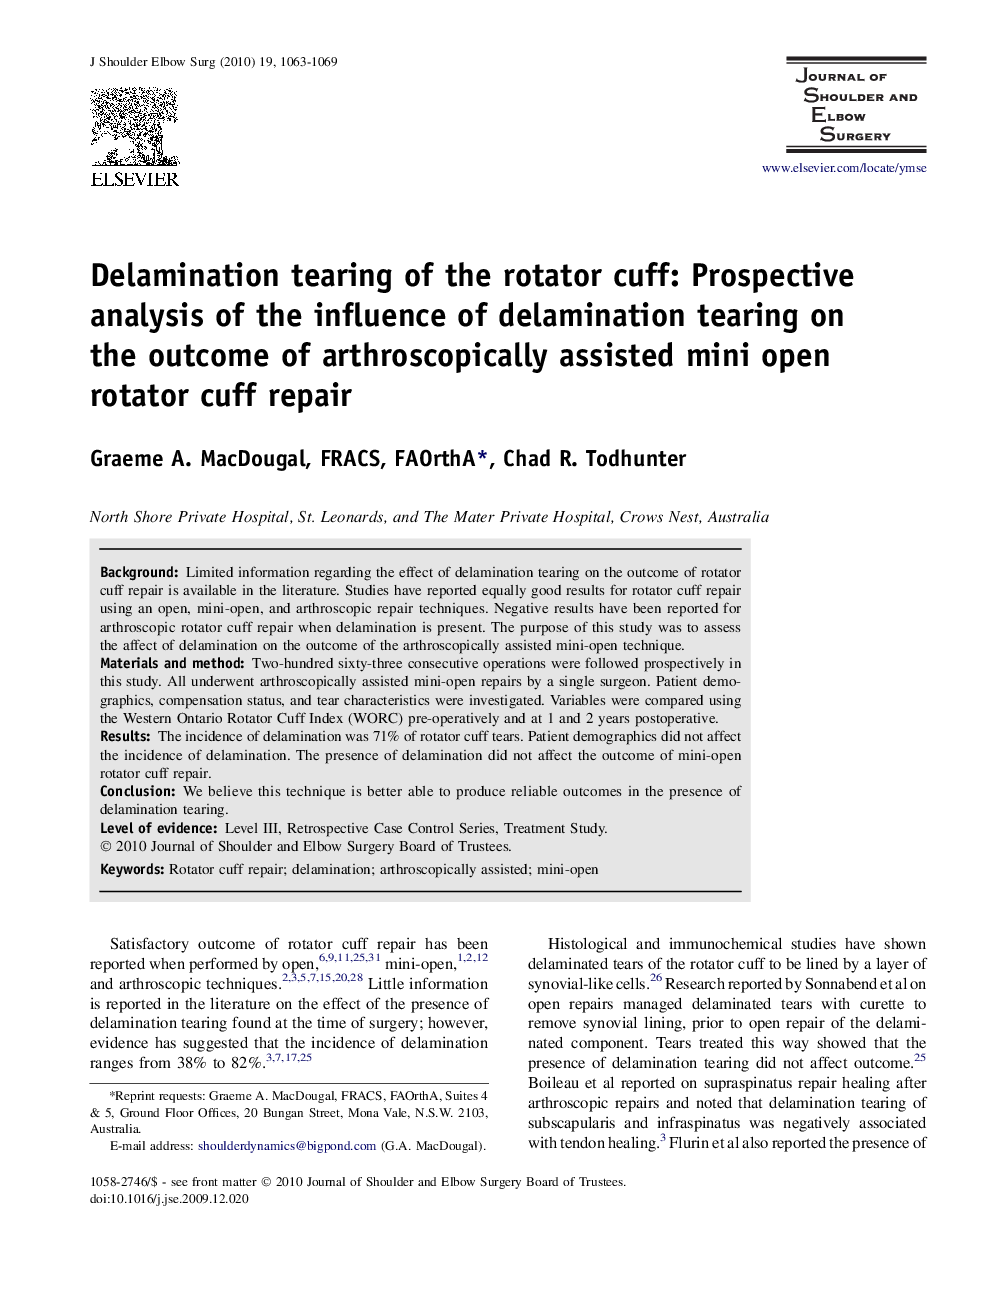 Delamination tearing of the rotator cuff: Prospective analysis of the influence of delamination tearing on the outcome of arthroscopically assisted mini open rotator cuff repair